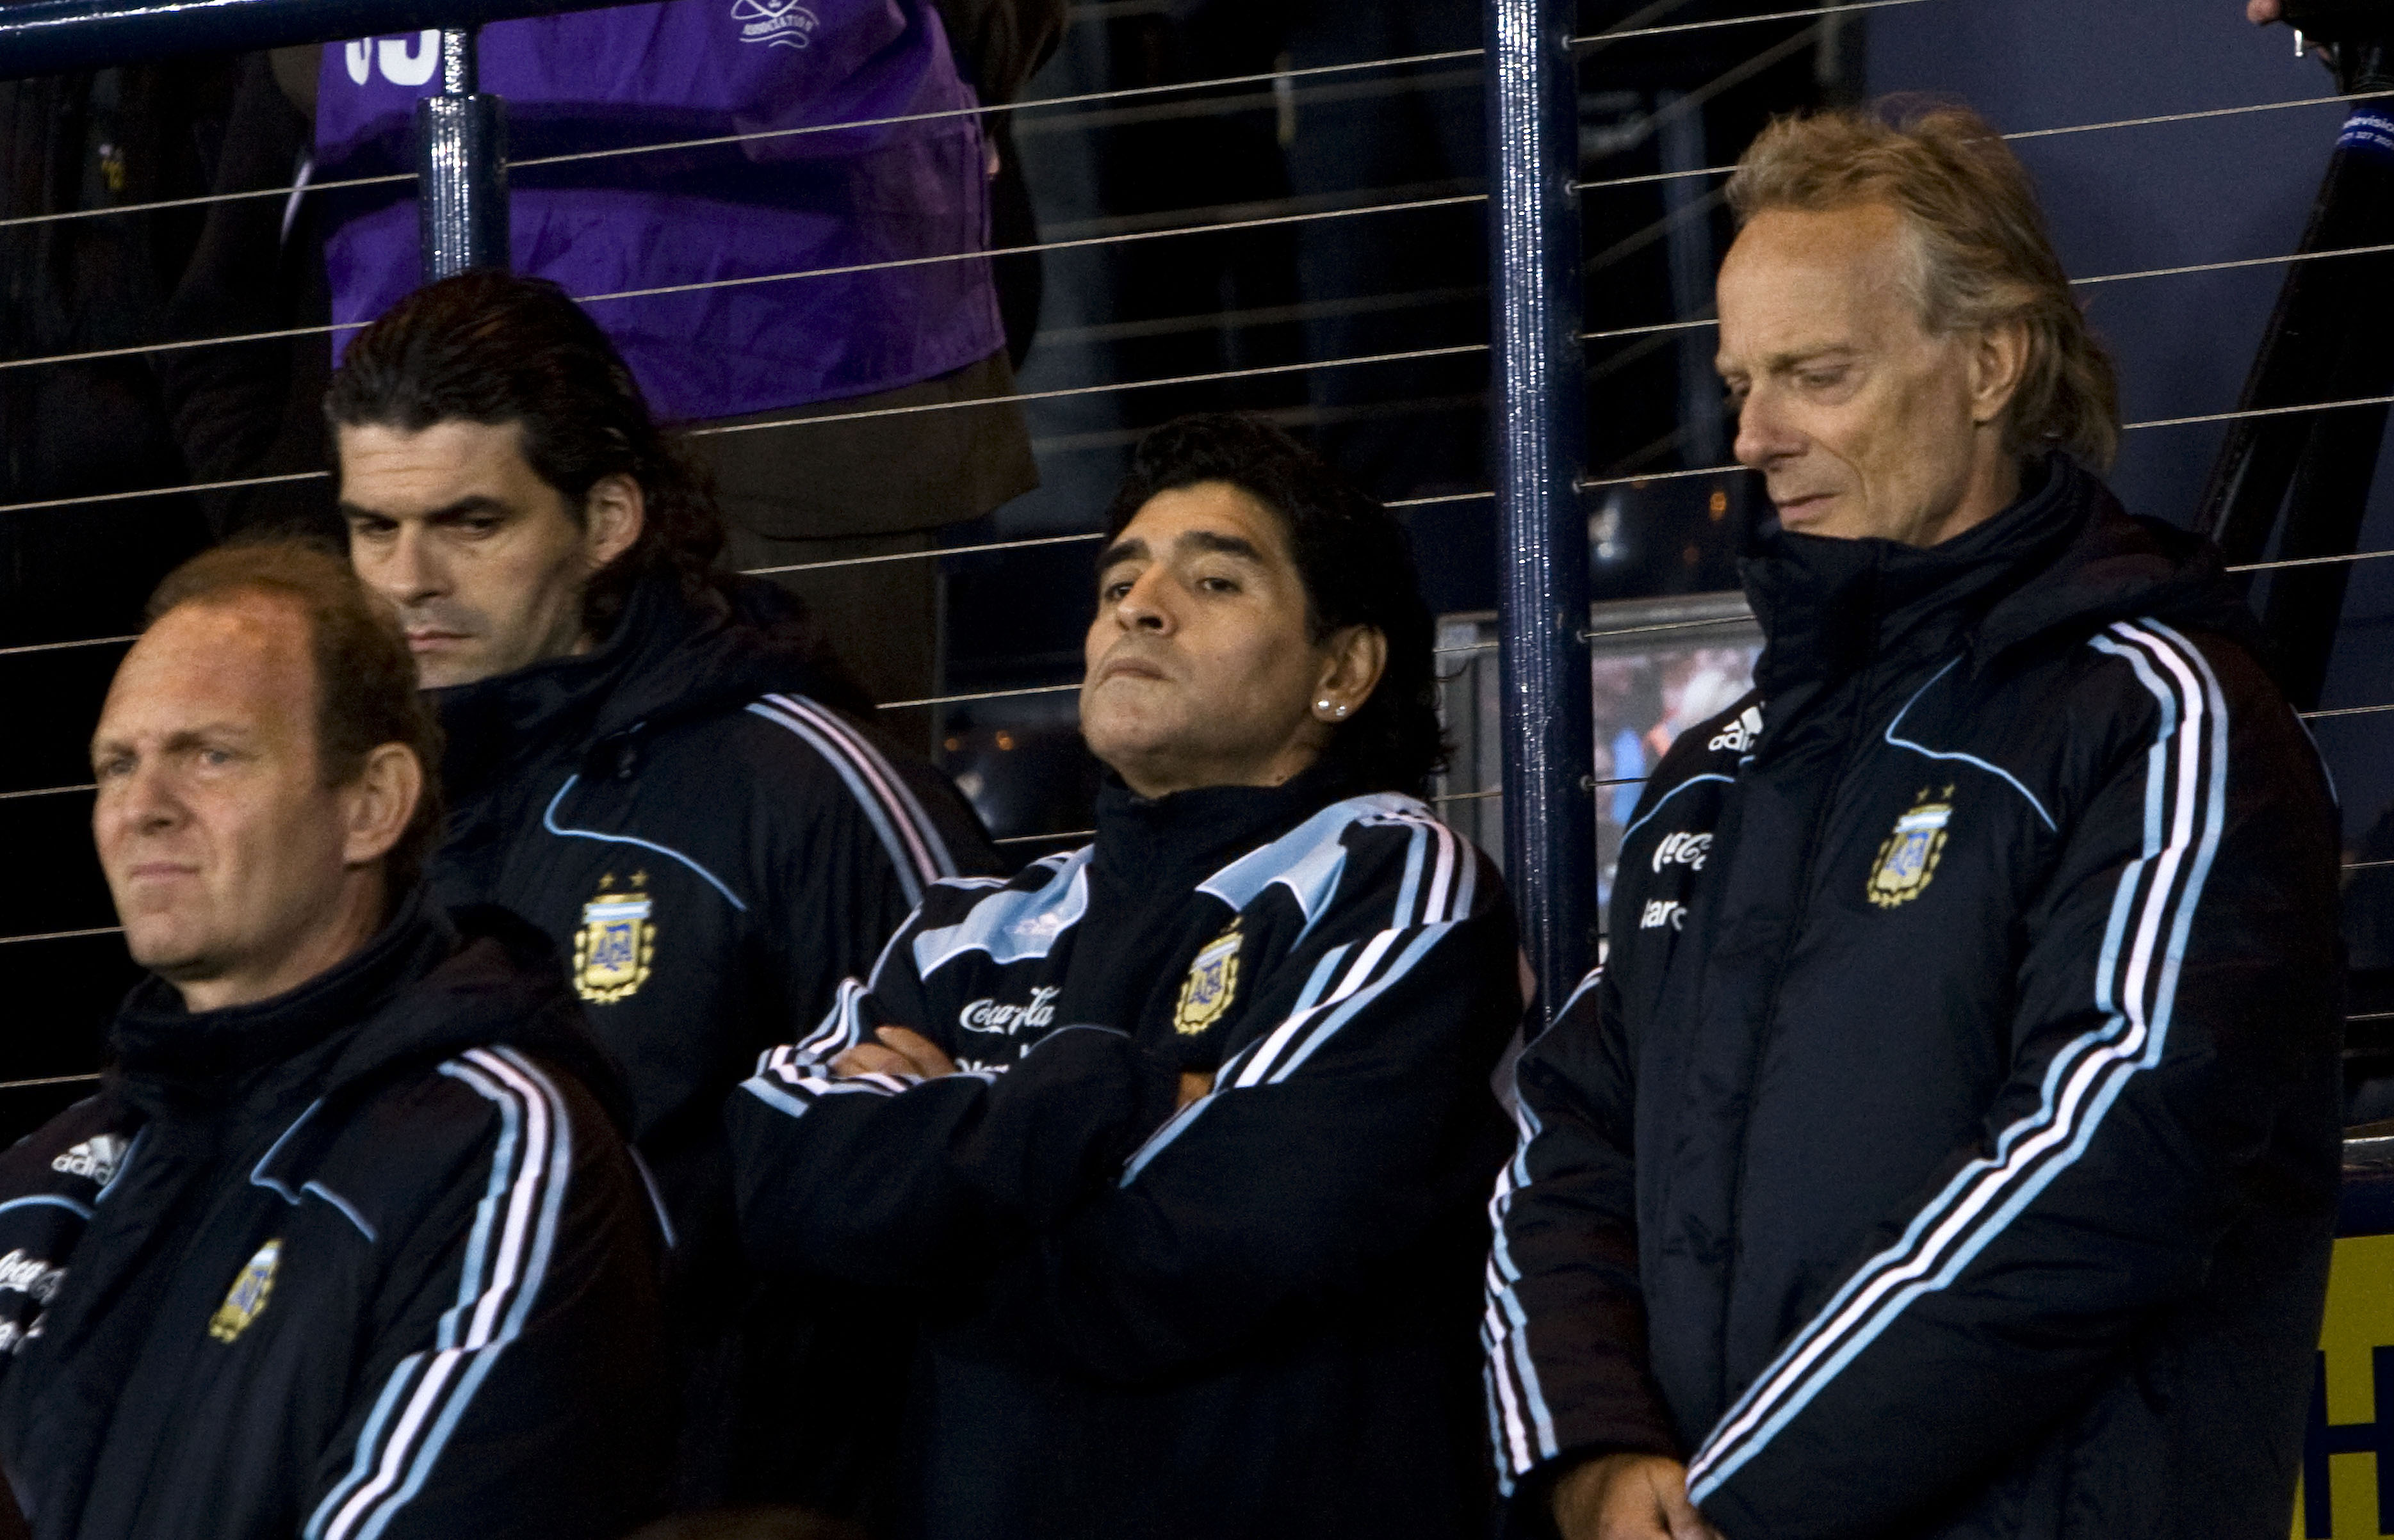 Maradona took charge of Argentina for the first time in a friendly at Hampden.